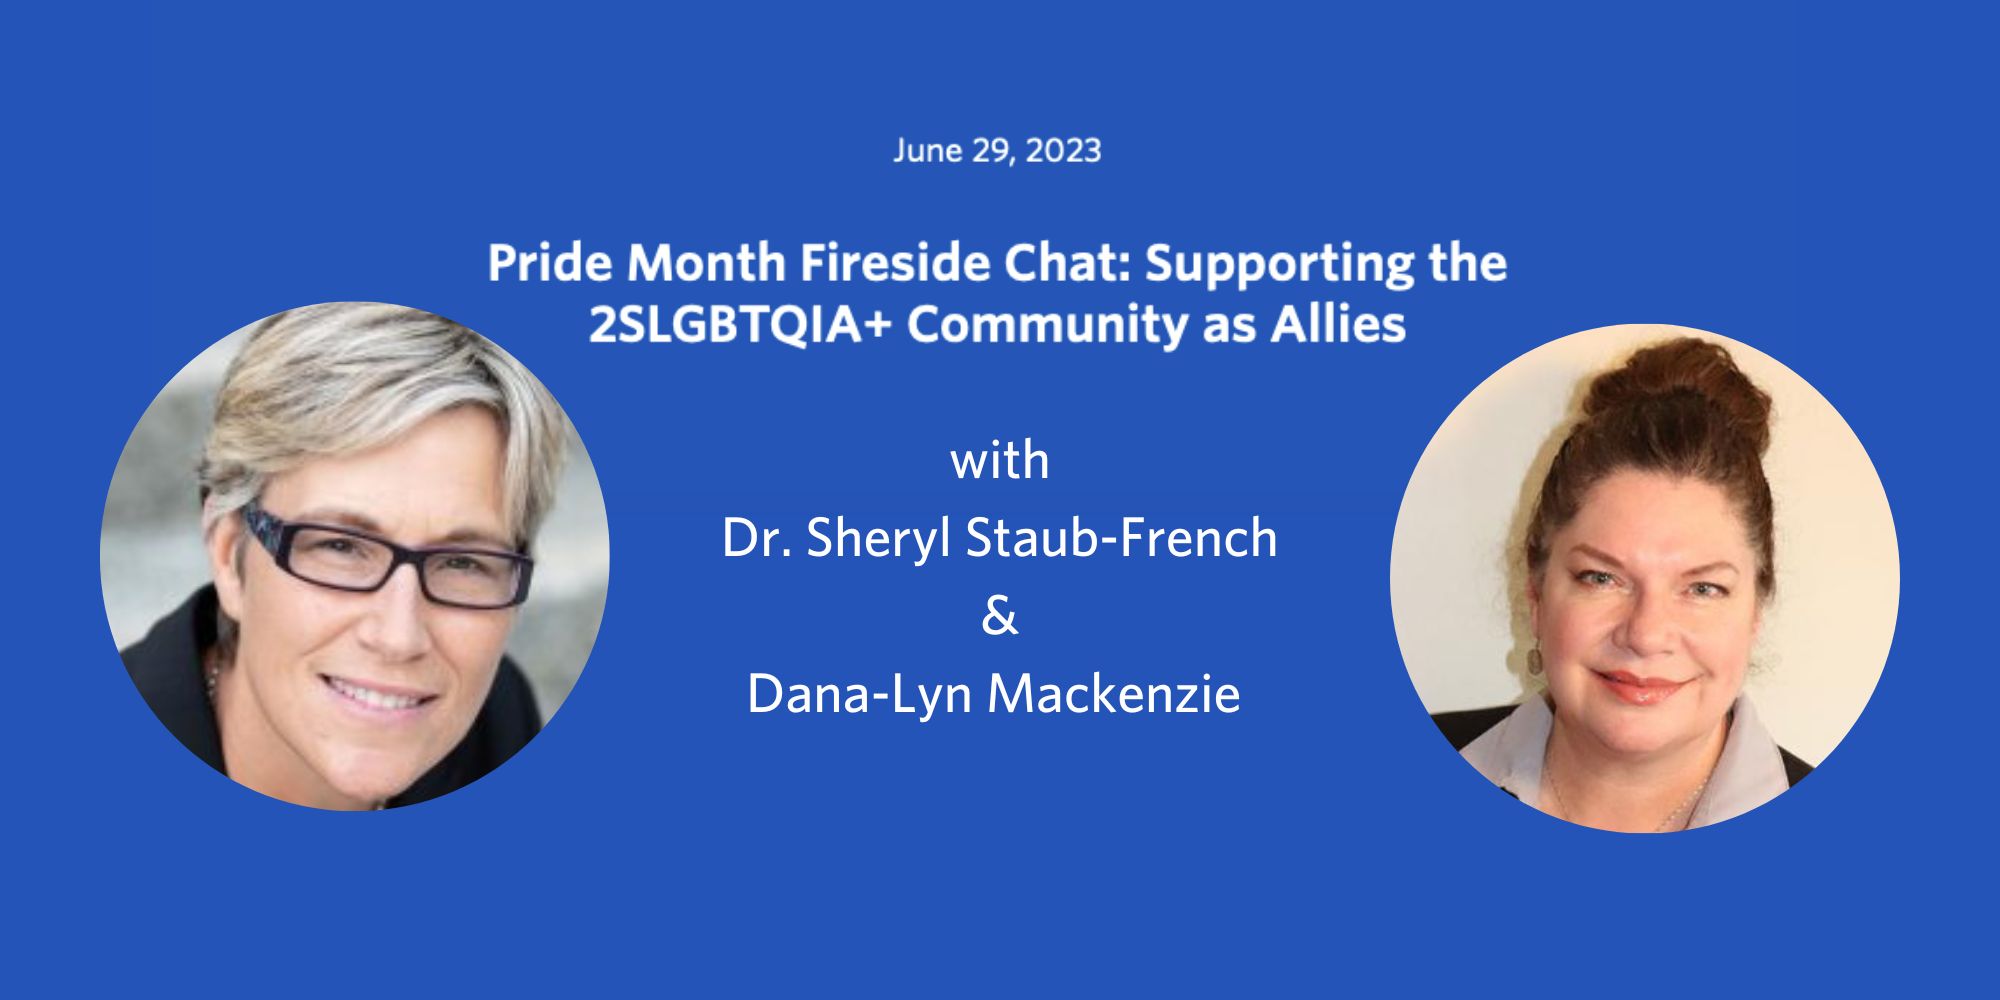 Pride Month Fireside Chat: Supporting the 2SLGBTQIA+ Community as Allies